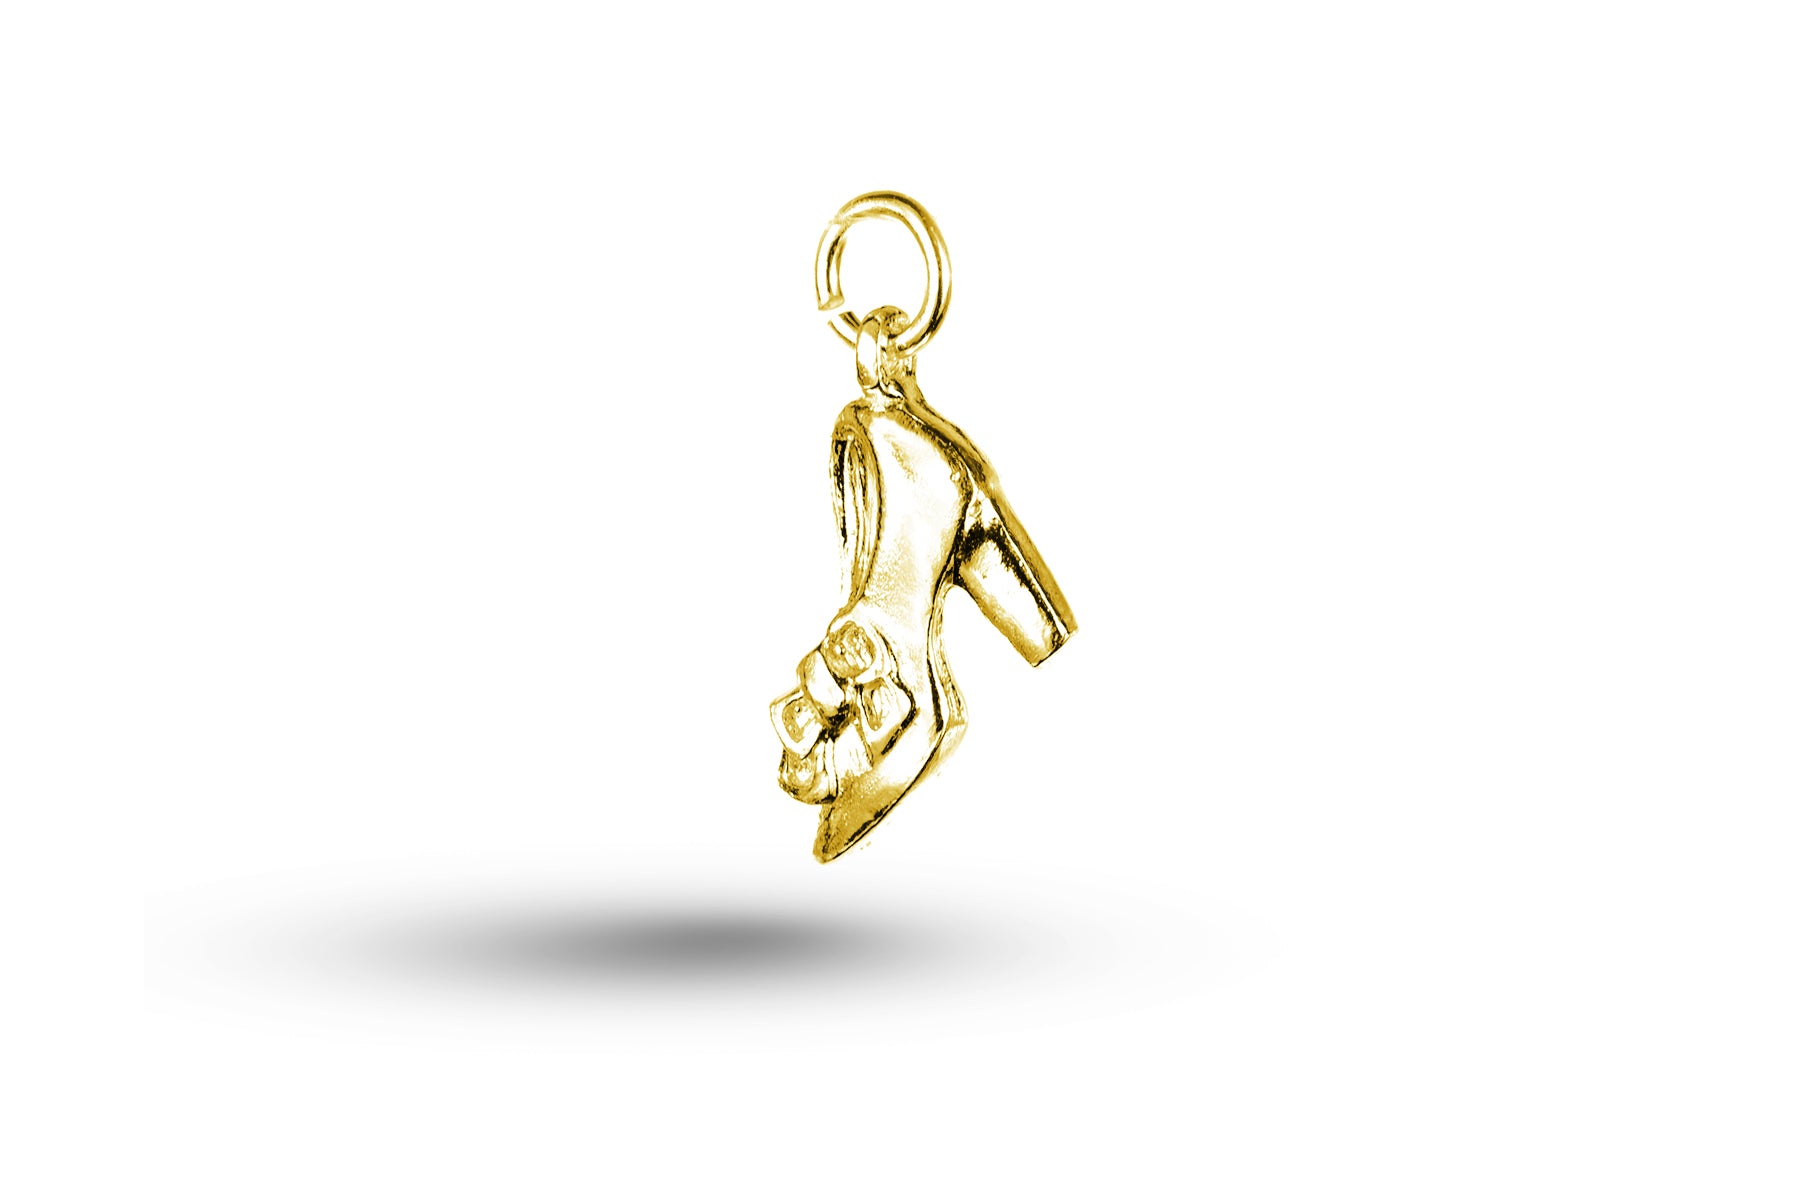 Yellow gold Ladies Heeled Shoe with Bow charm.